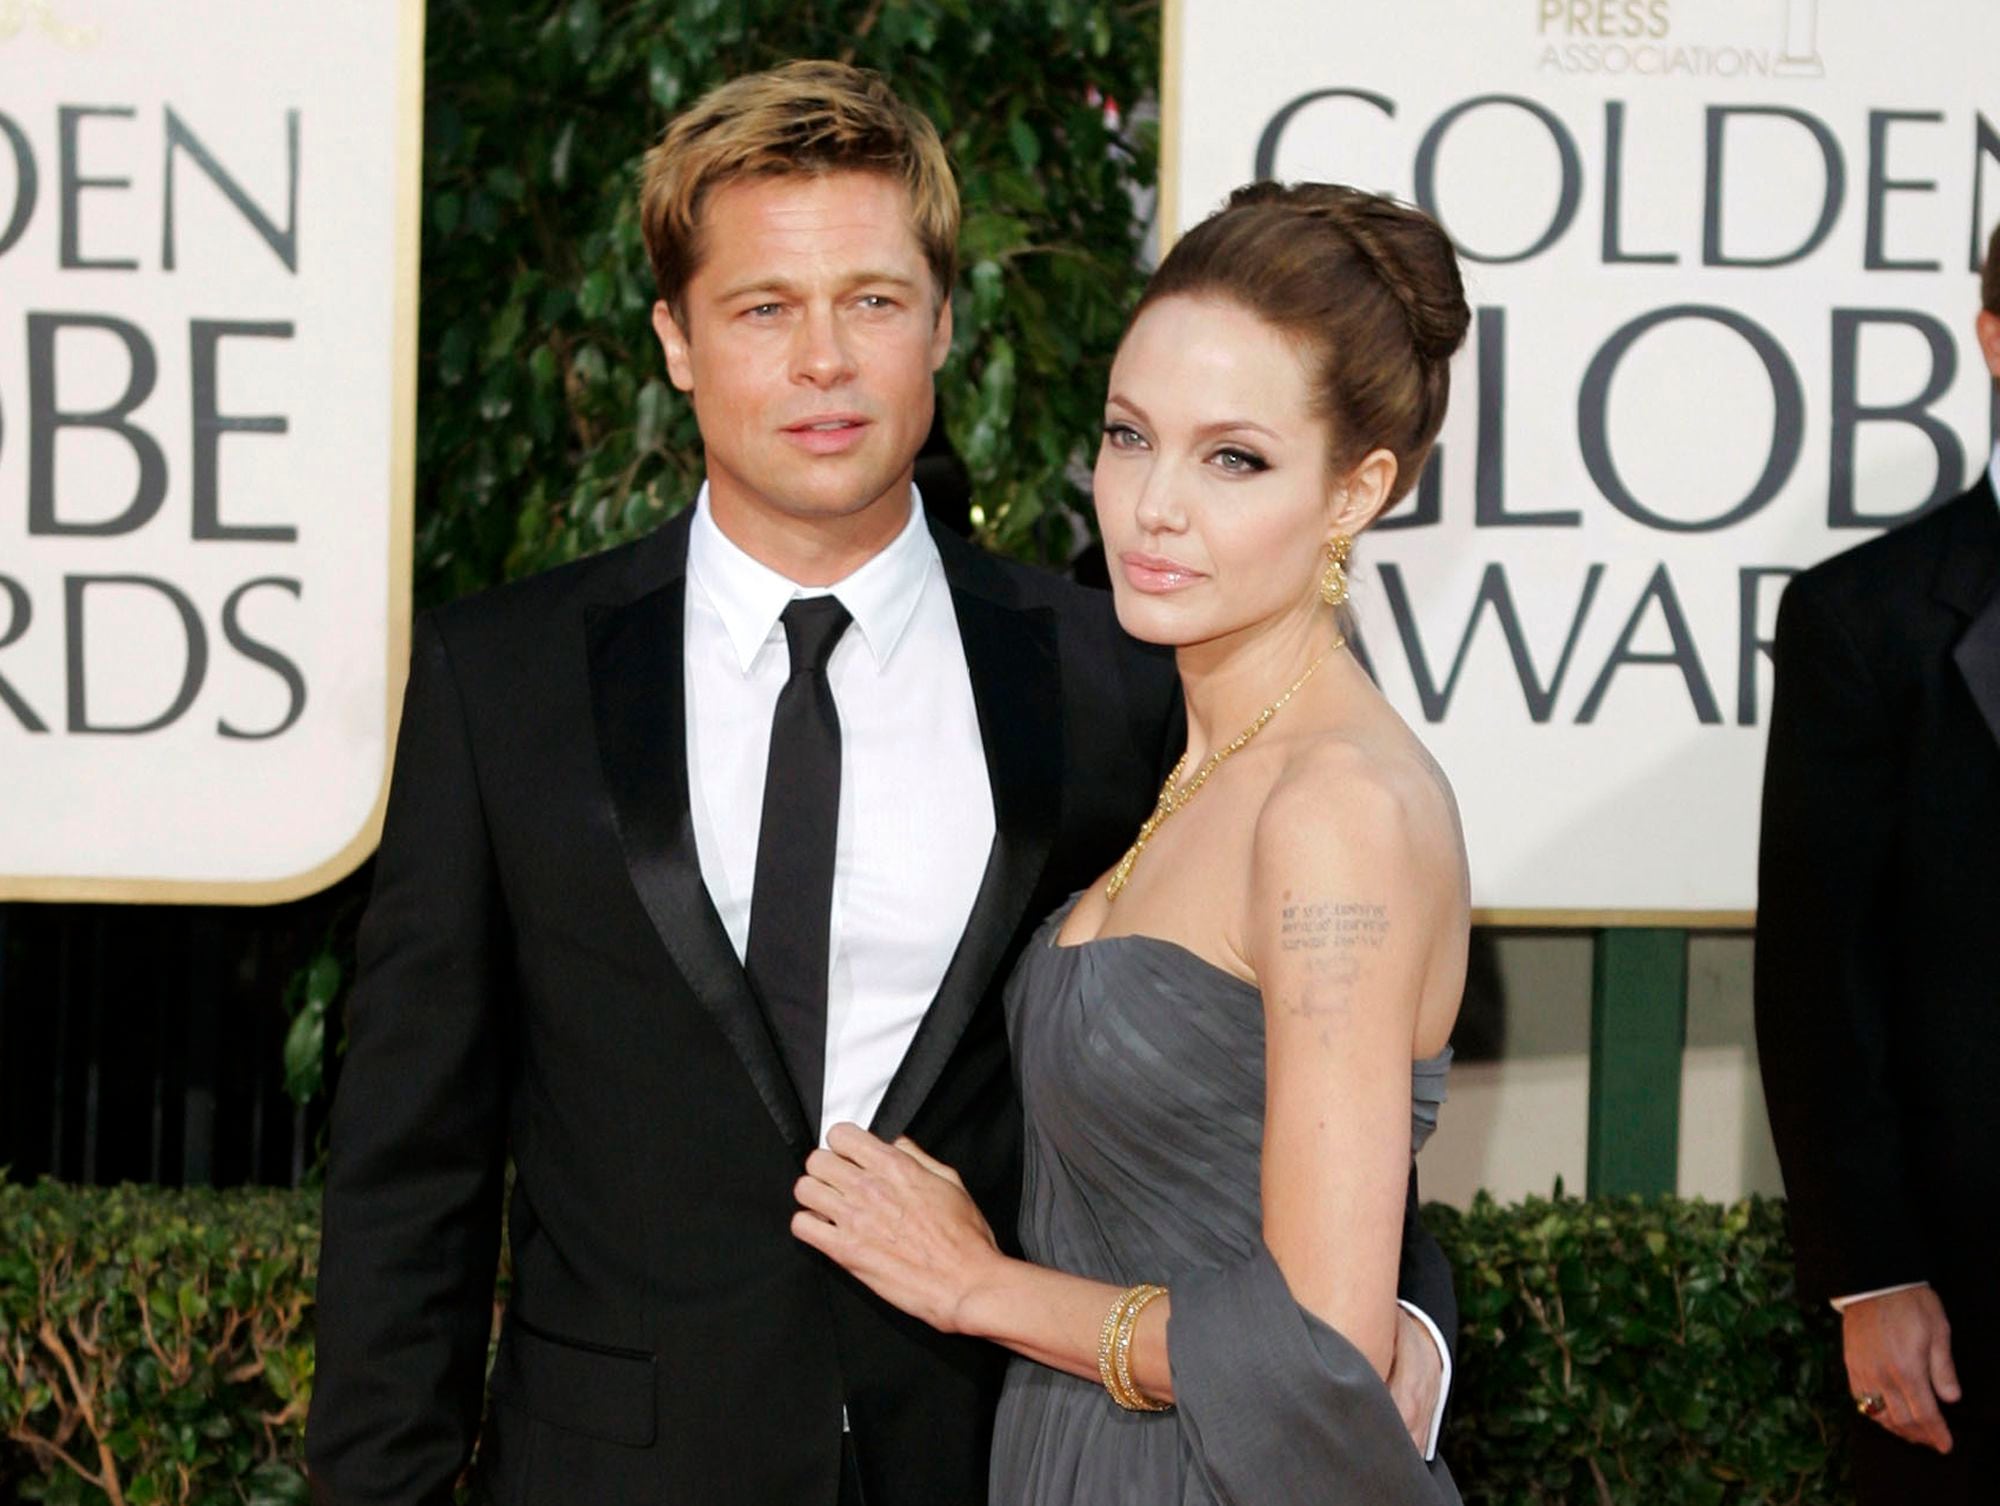 FILE - In this Jan. 15, 2007 file photo, Brad Pitt, and actress Angelina Jolie arrive for the 64th Annual Golden Globe Awards in Beverly Hills, Calif.  The couple have reached a temporary agreement that will allow the actor to visit with his six children, sources familiar with the arrangement told The Associated Press on Friday, Sept. 30, 2016. Jolie Pitt filed for divorce last week.  (AP Photo/Mark J. Terrill, File)